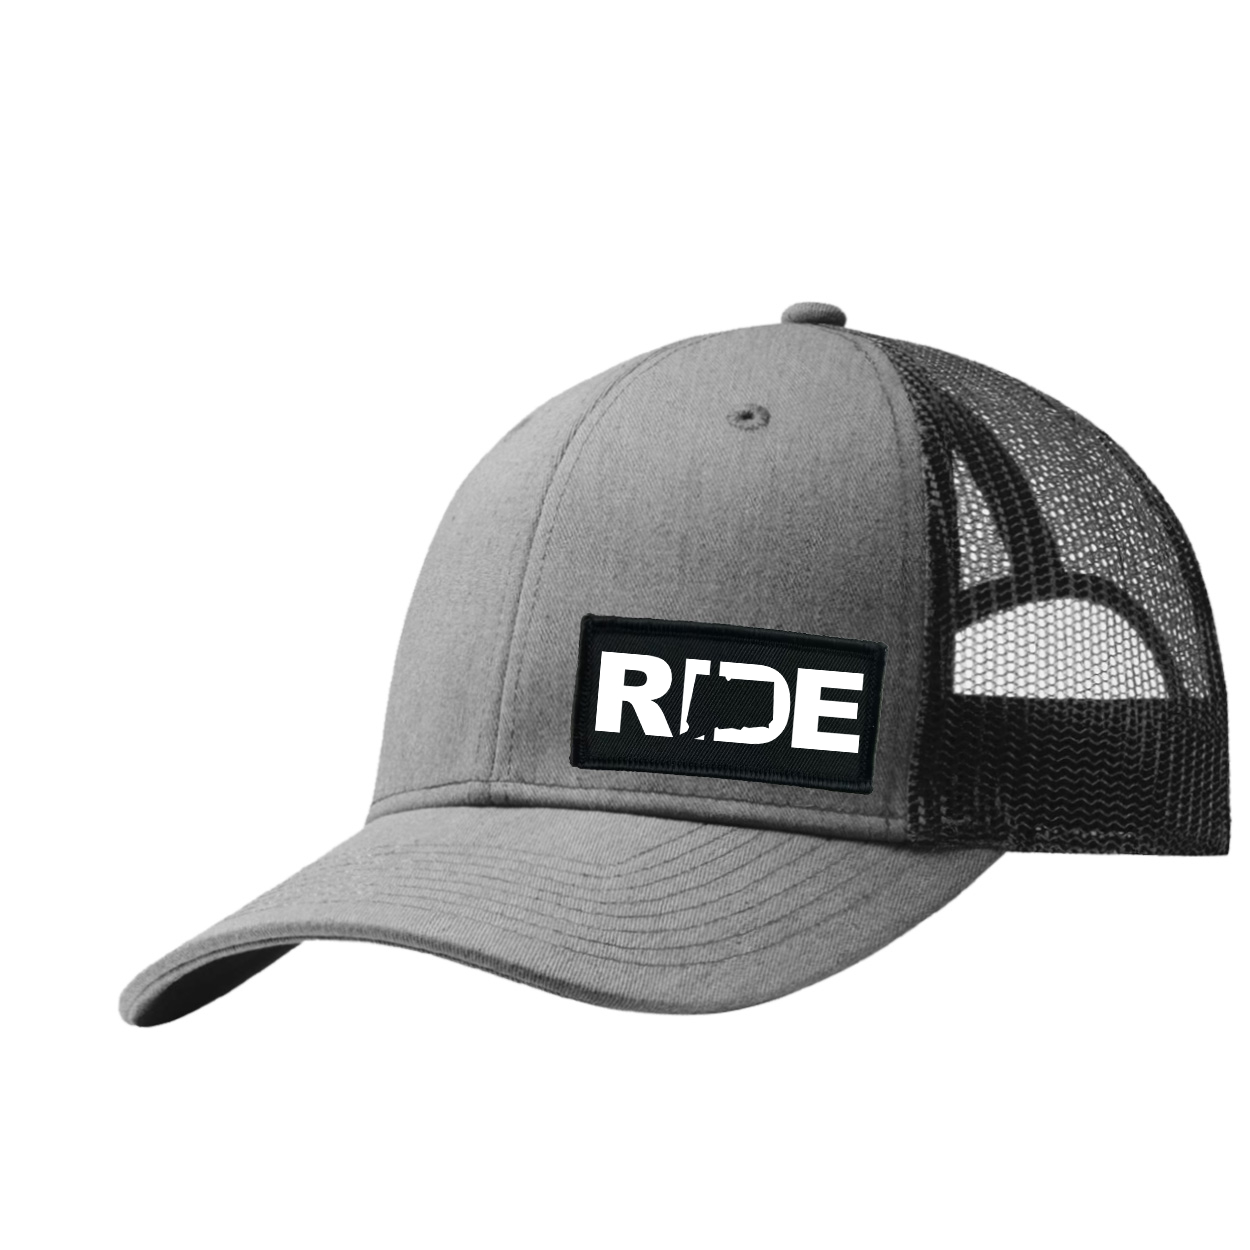 Ride Connecticut Night Out Woven Patch Snapback Trucker Hat Heather Gray/Black (White Logo)